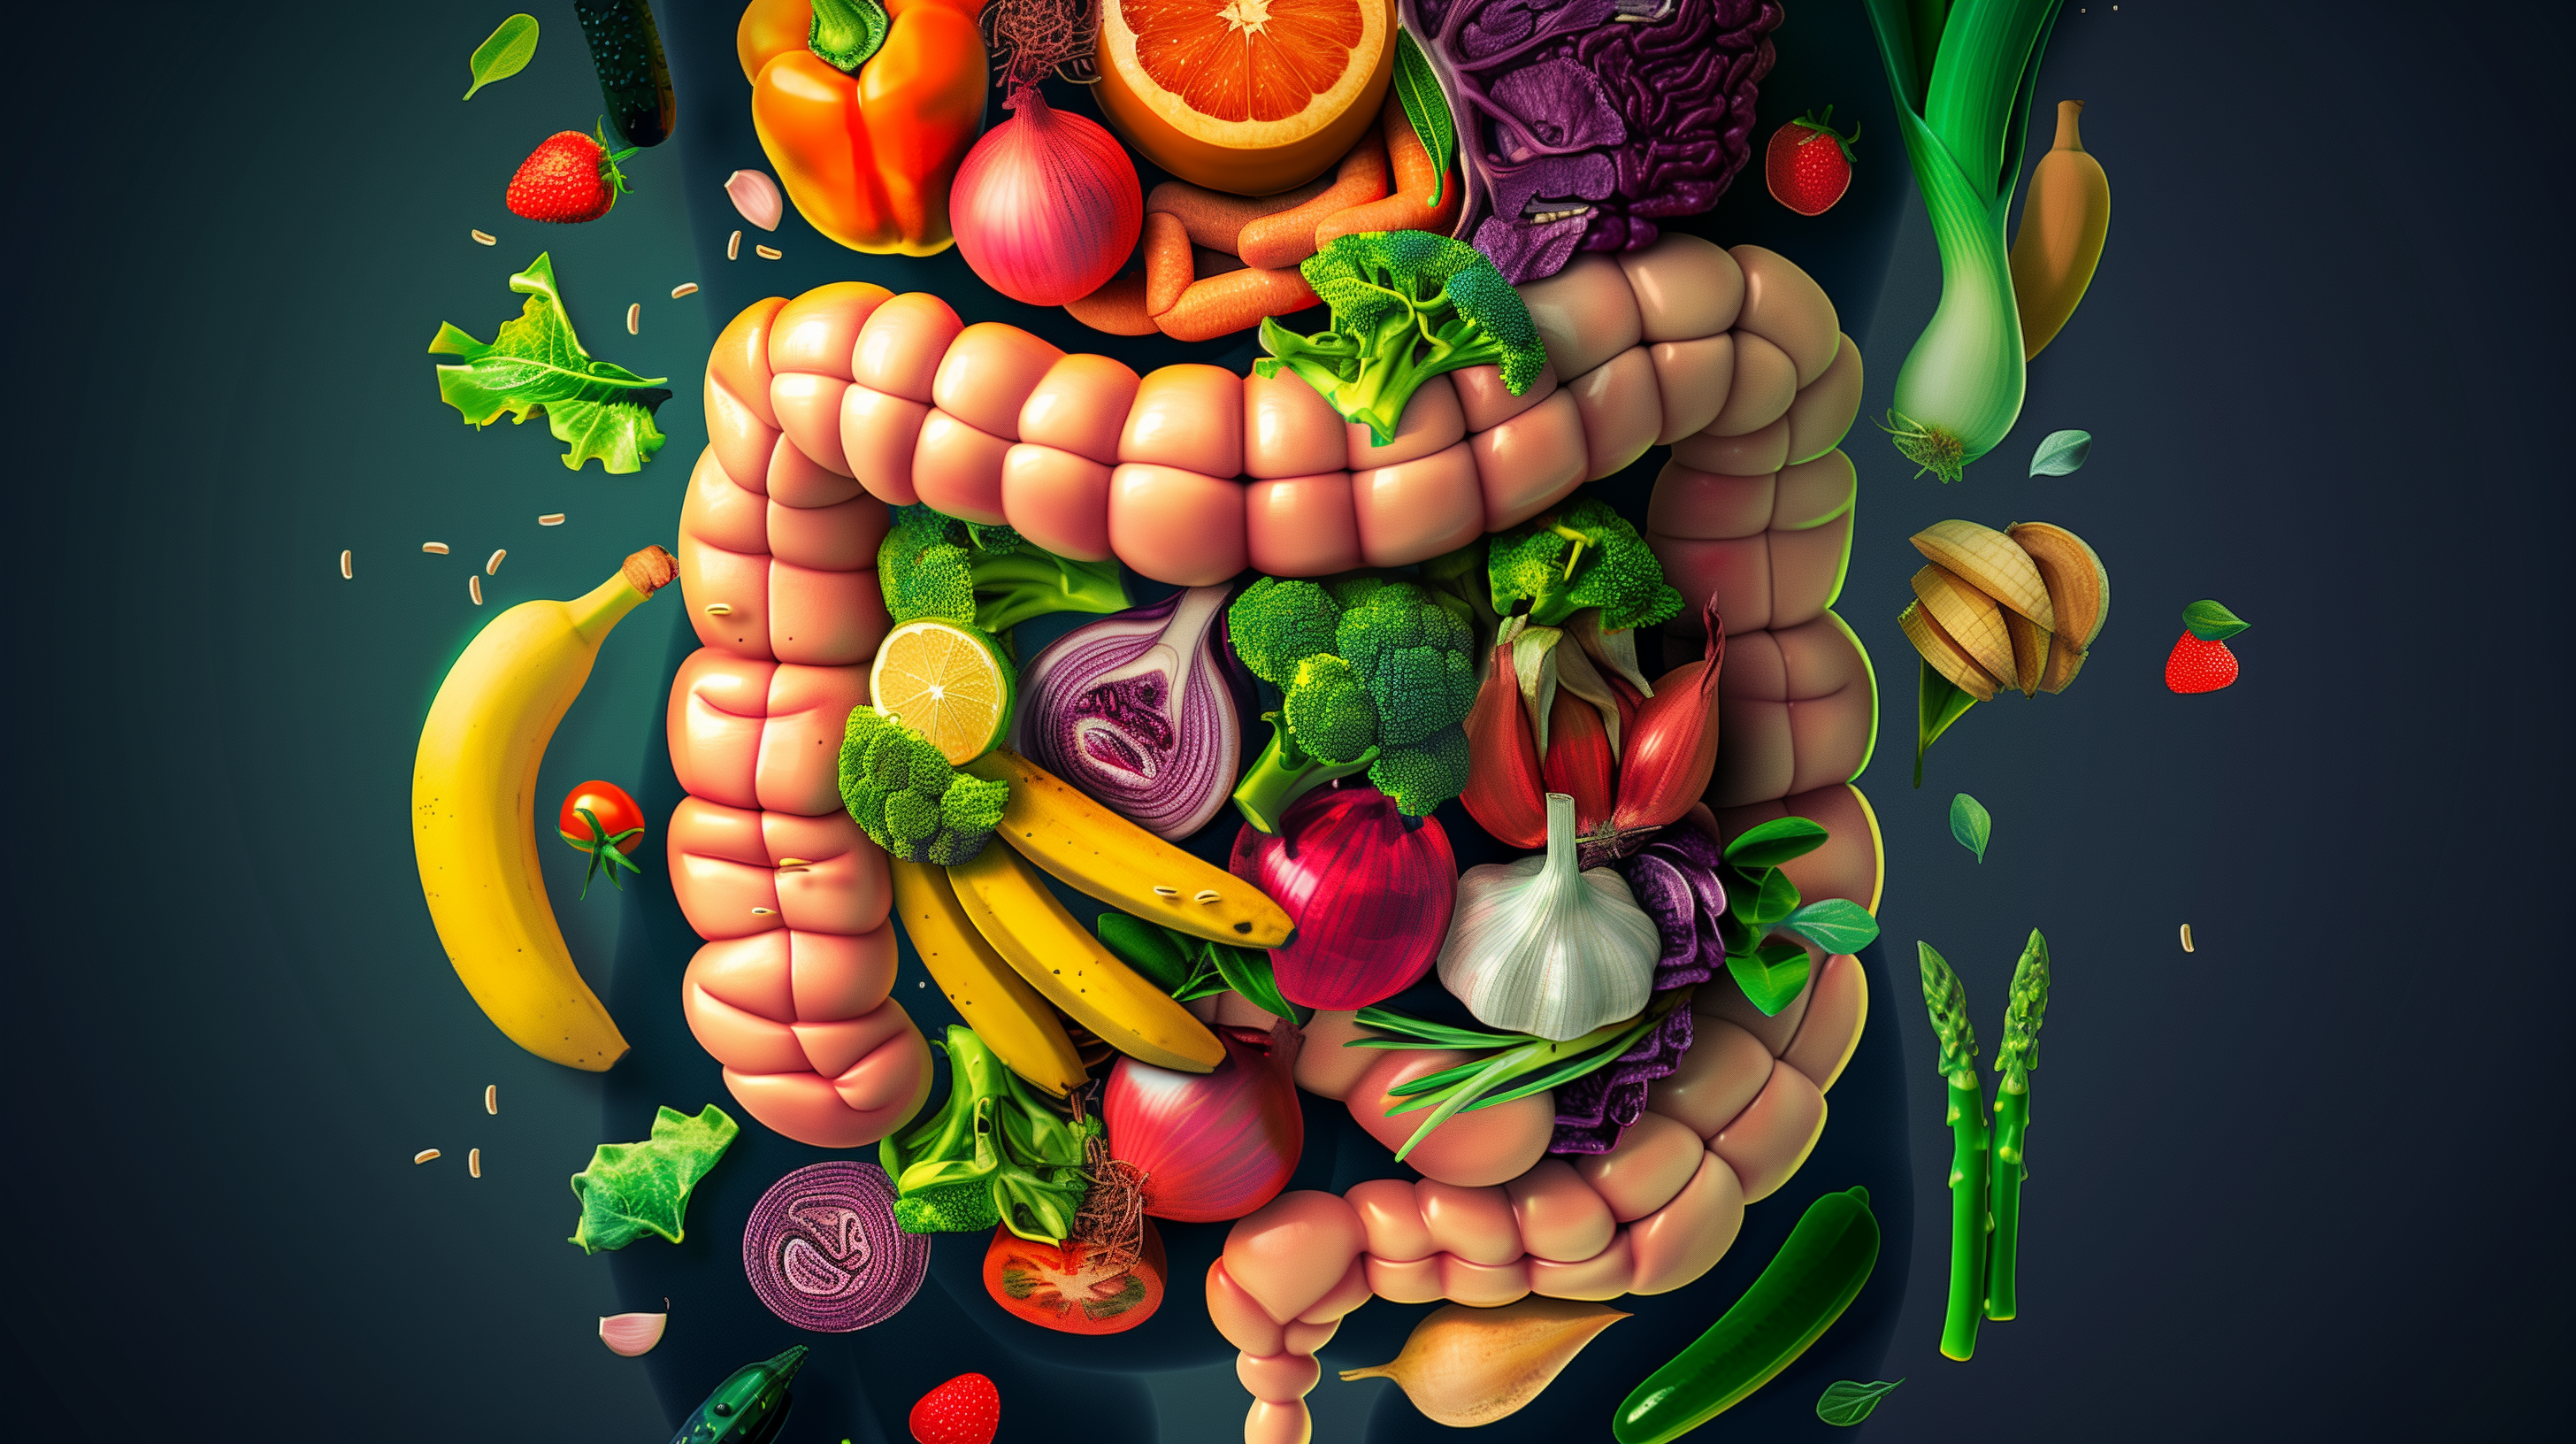 human digestive system highlighting the gut flora, with vibrant, diverse prebiotic fiber sources like garlic, onions, bananas, and asparagus